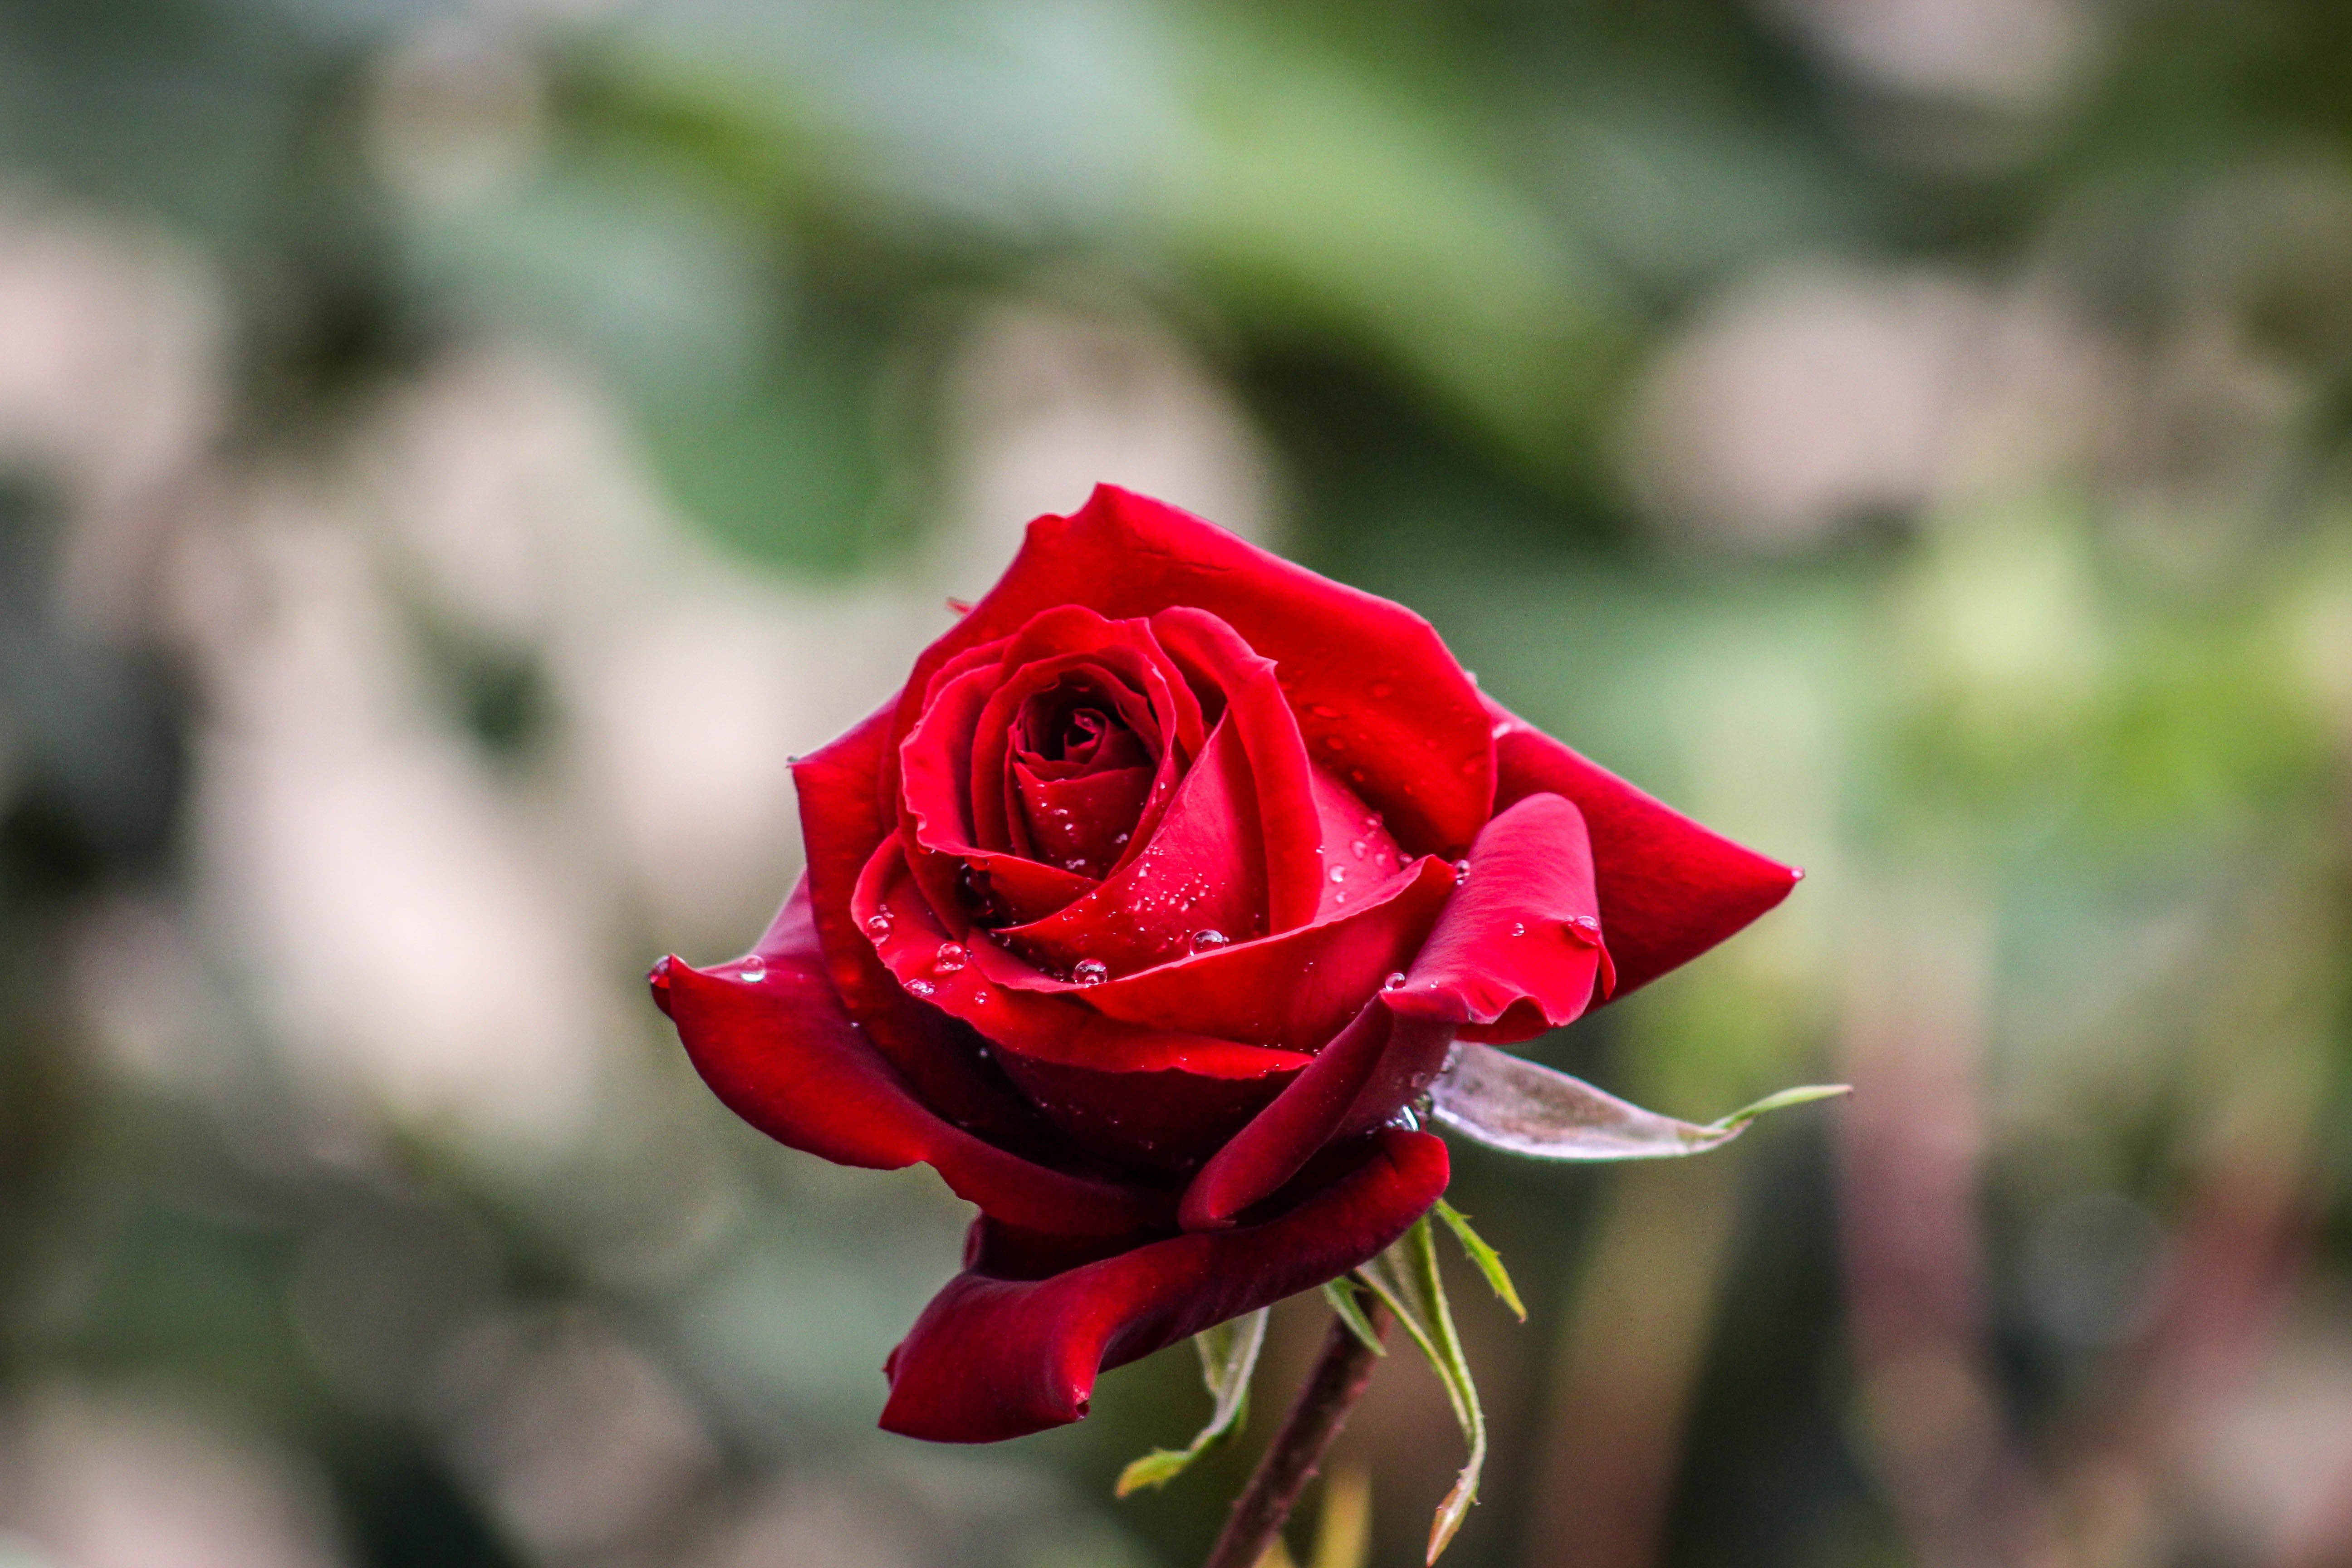 Mark bought the most beautiful red rose in the shop. | Source: Pexels